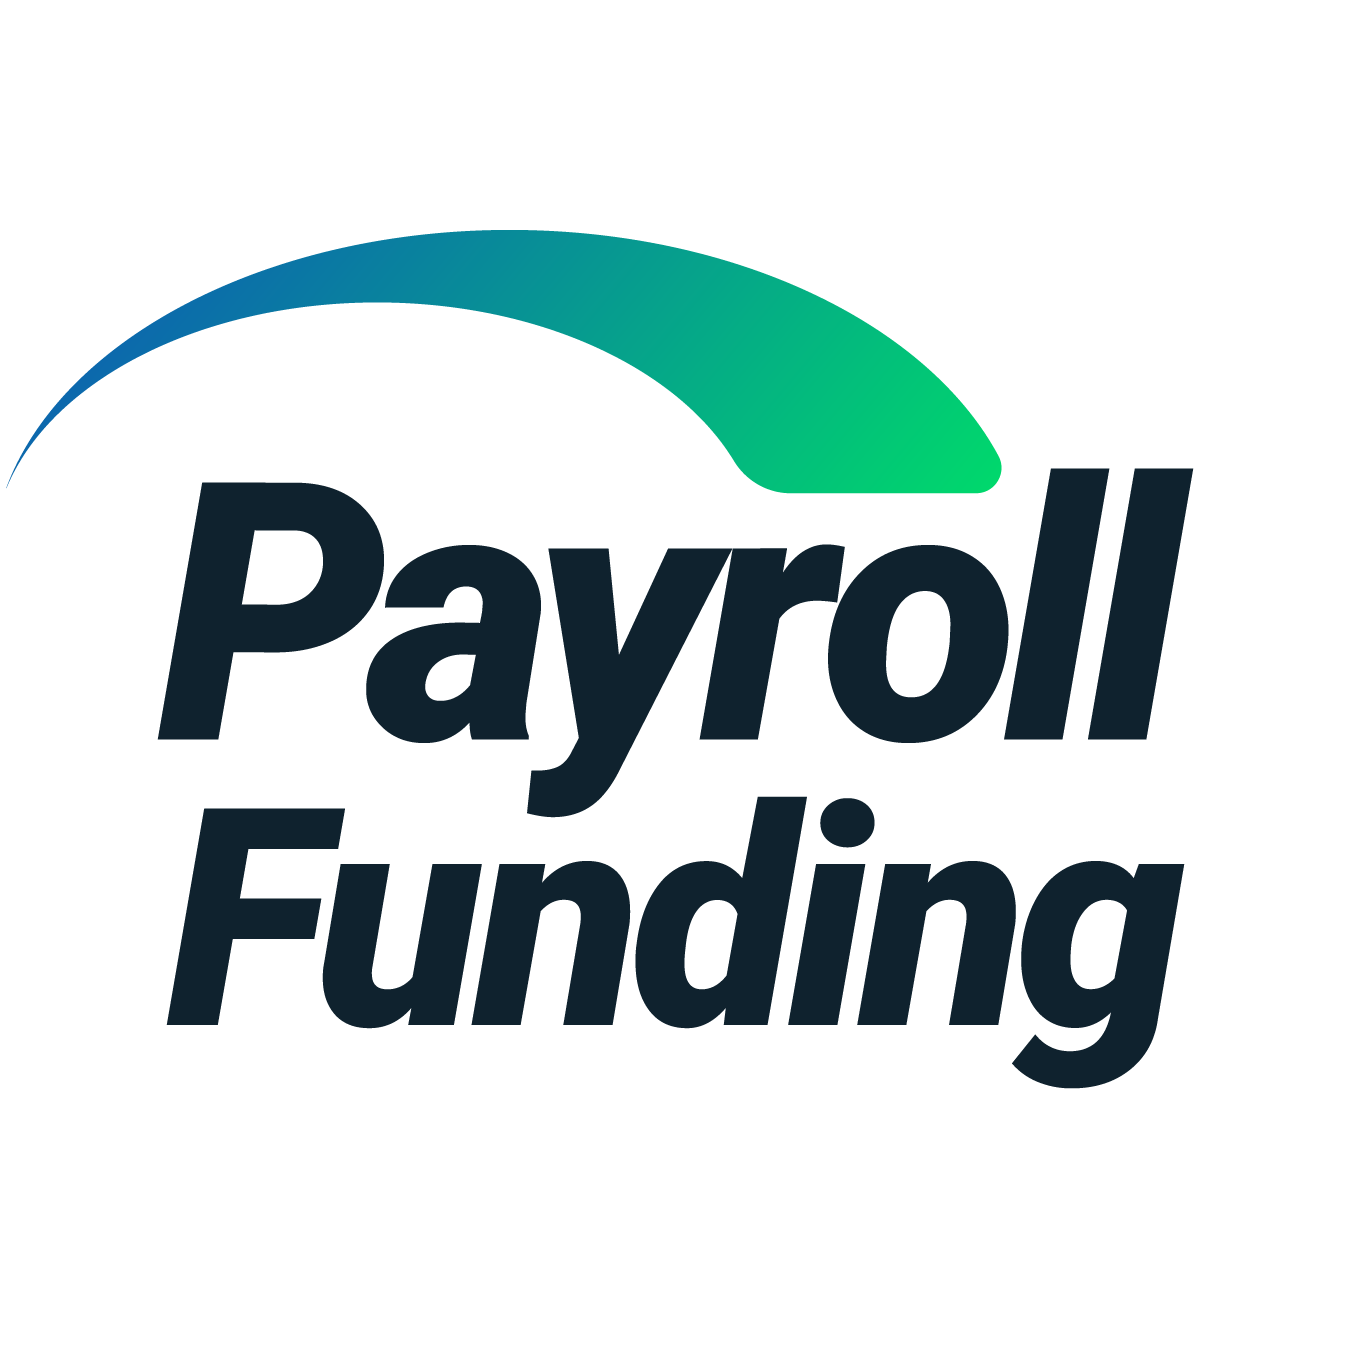 payroll-funding-square.png 622